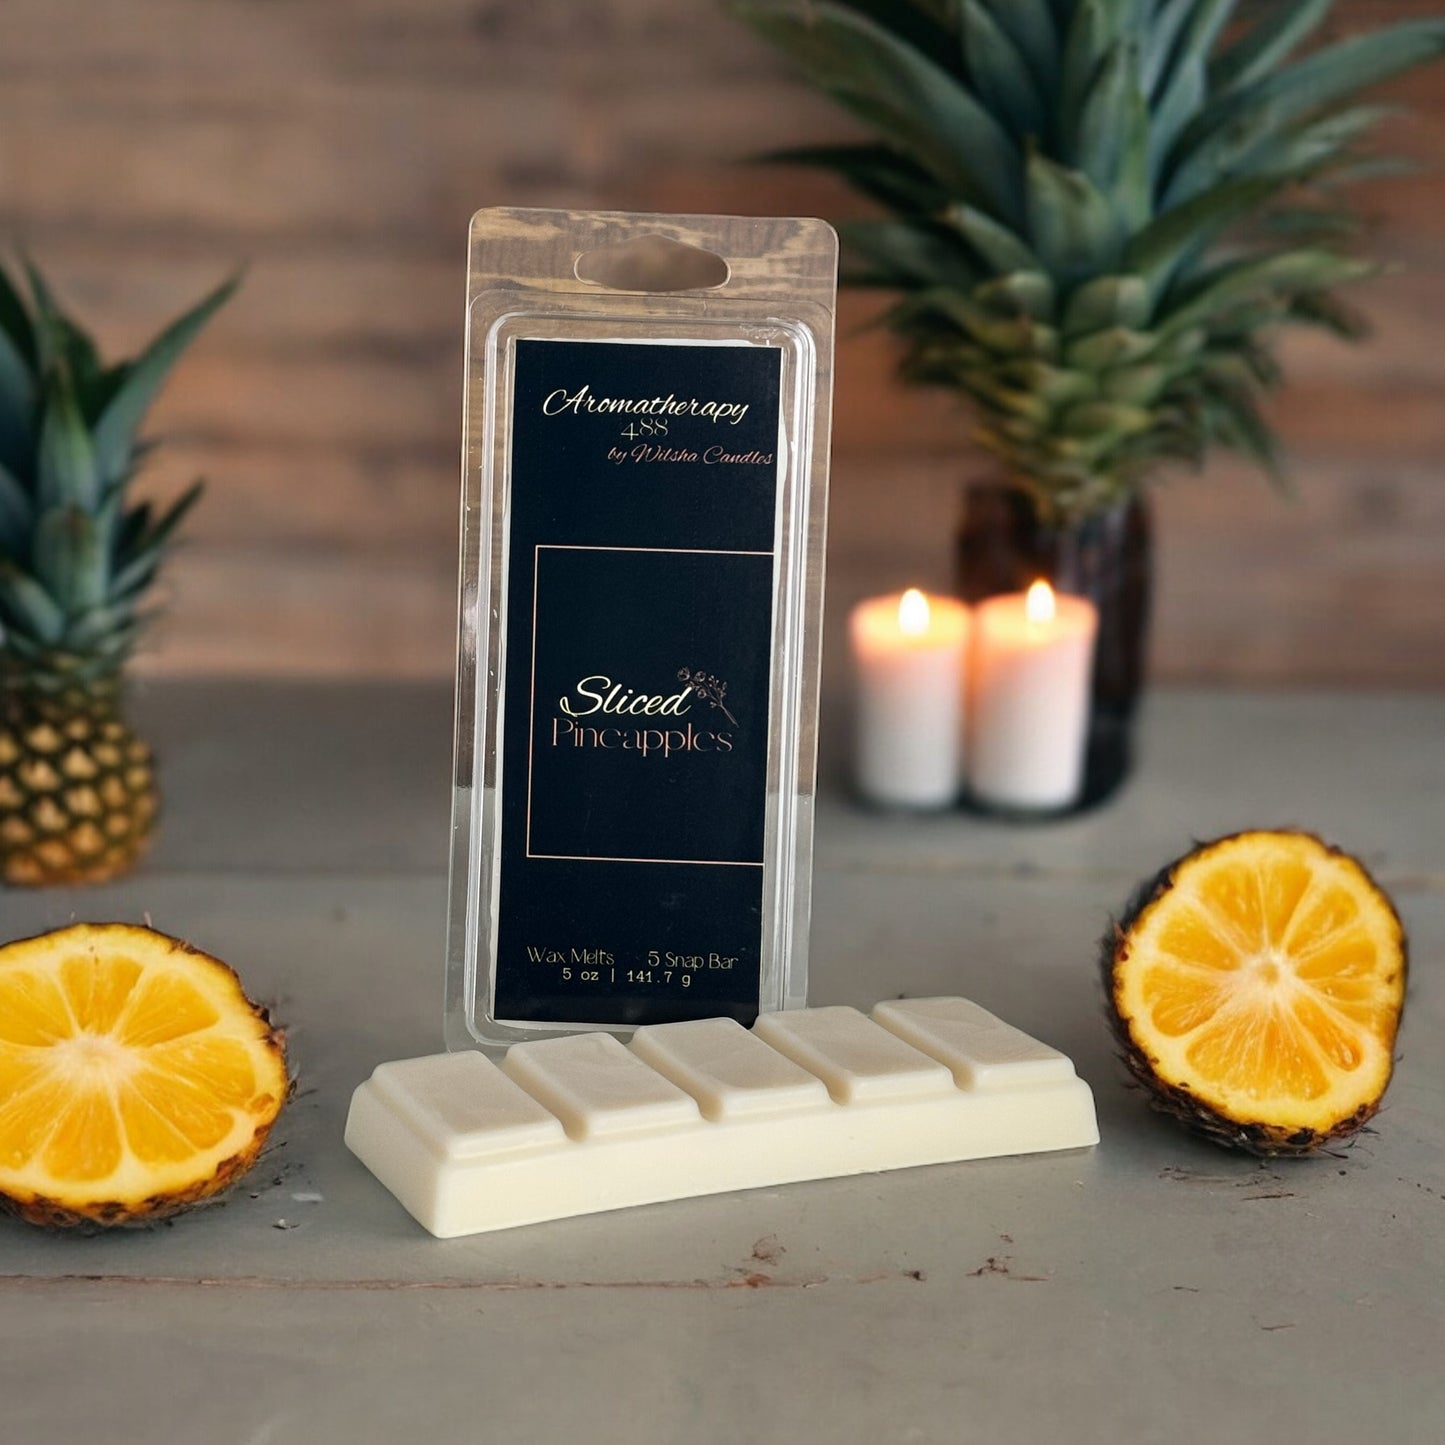 2 oz Snap Bar Wax Melts | Handcrafted | Travel Safe | Hand Poured Natural Pillar Soy Wax | High Quality Eco-Friendly | Luxury | Aromatherapy Wax Melts for Relaxation